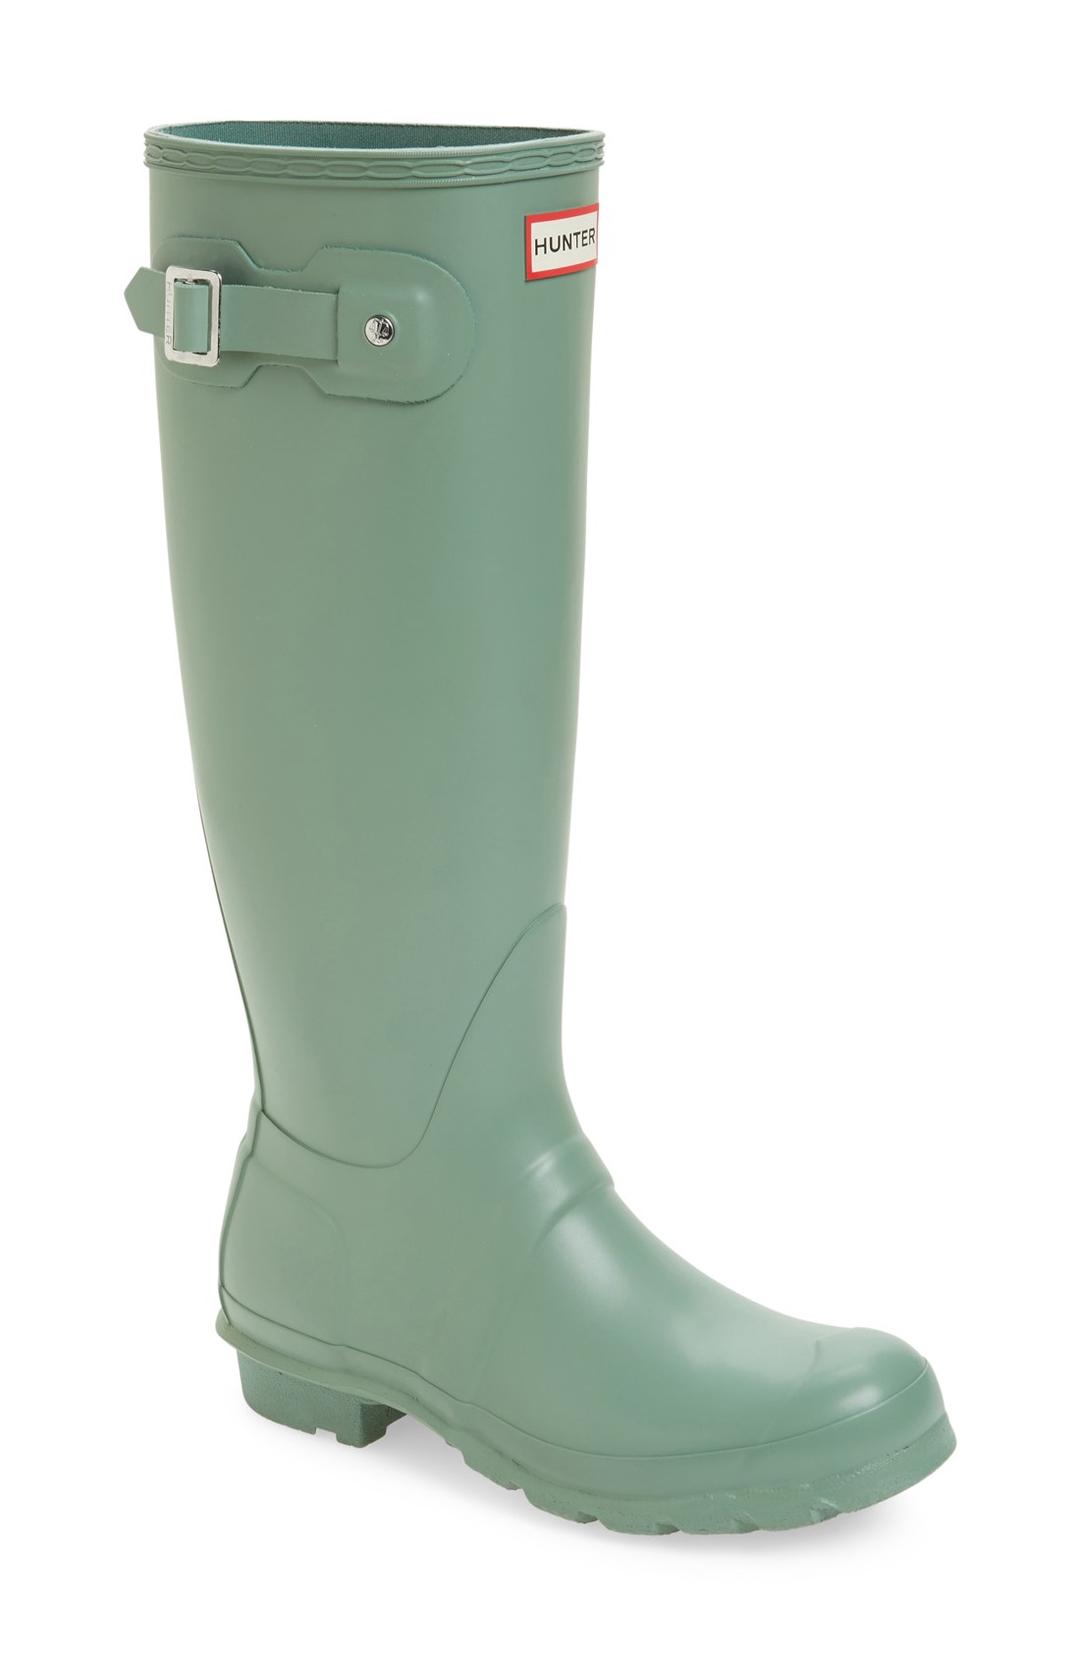 25 Pairs of Rain Boots for Wide Calves 